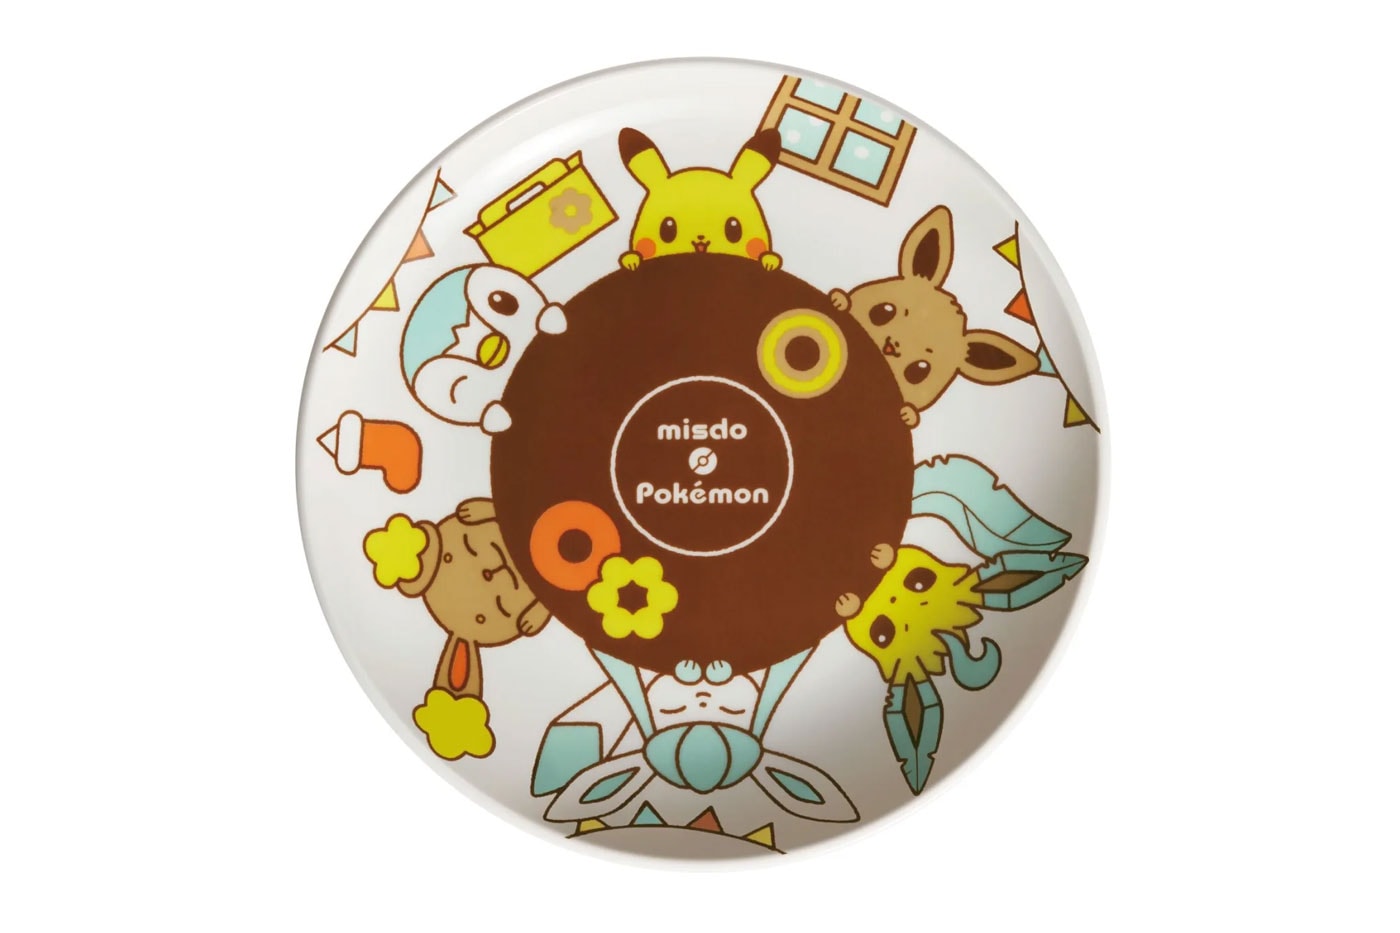 Japanese Mister Donut Chain Adds Pokémon Doughnuts to Their Repertoire eevee piplup pachirisu glaceon tokyo japan